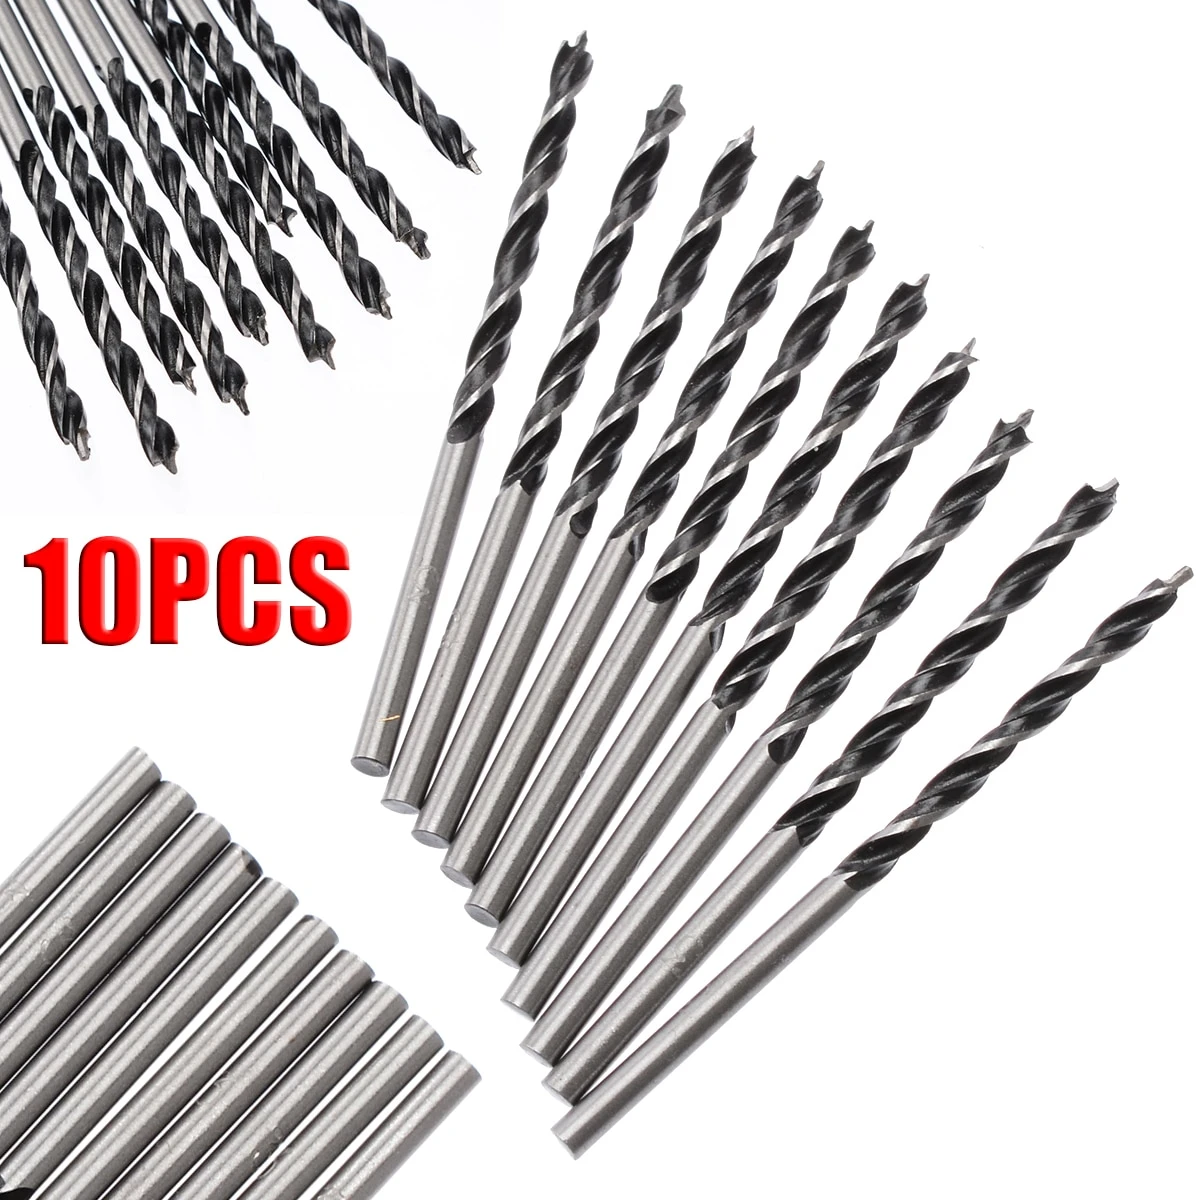 10pcs/Set 3mm Diam Twist Drill Bit 58mm Length Wood Spiral Drill Bits with Center Point High Strength Woodworking Drilling Tool